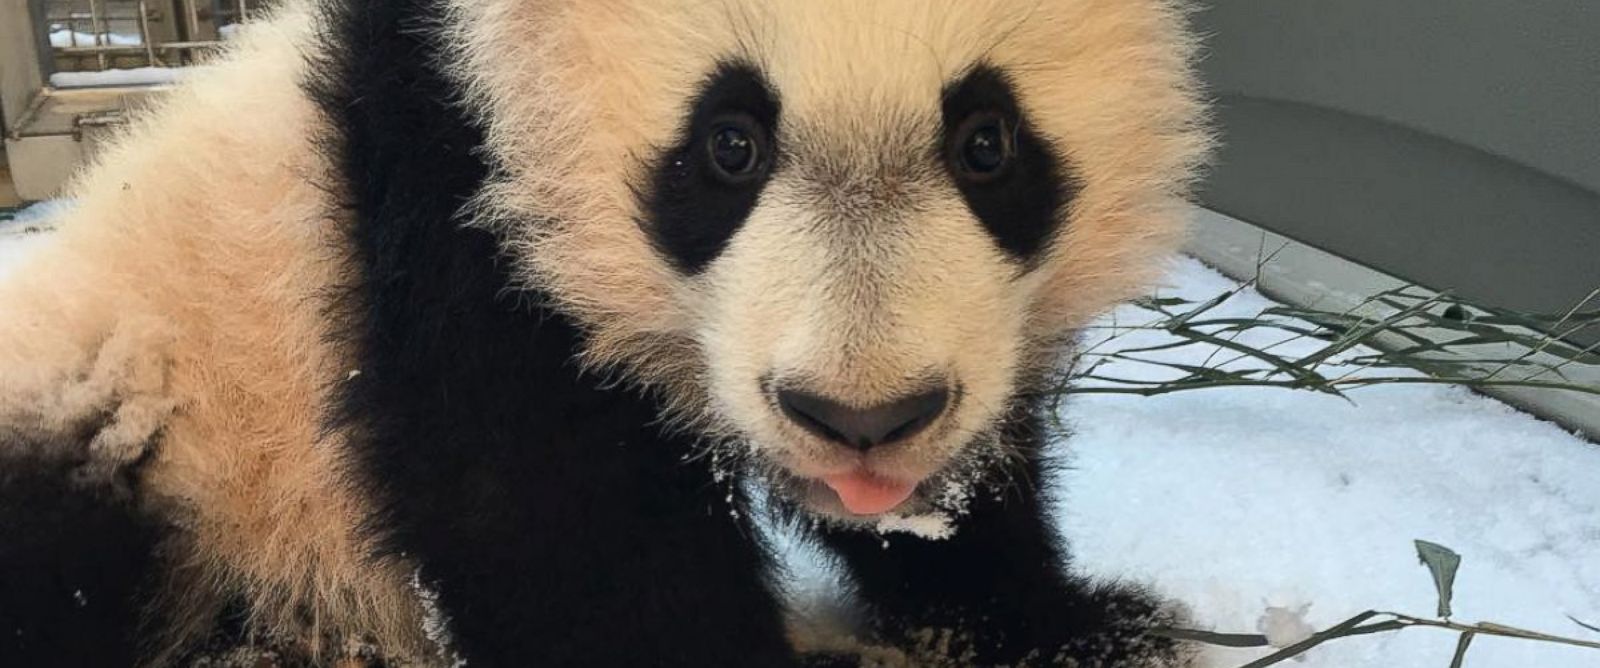 PHOTO: The Smithsonian Zoo posted this photo on Instagram with the caption, "BeiBei had his first introduction to snow today! He wasnt quite sure what to make of the powdery snow and made his way back inside quickly," on Jan. 21, 2016 in Washington.